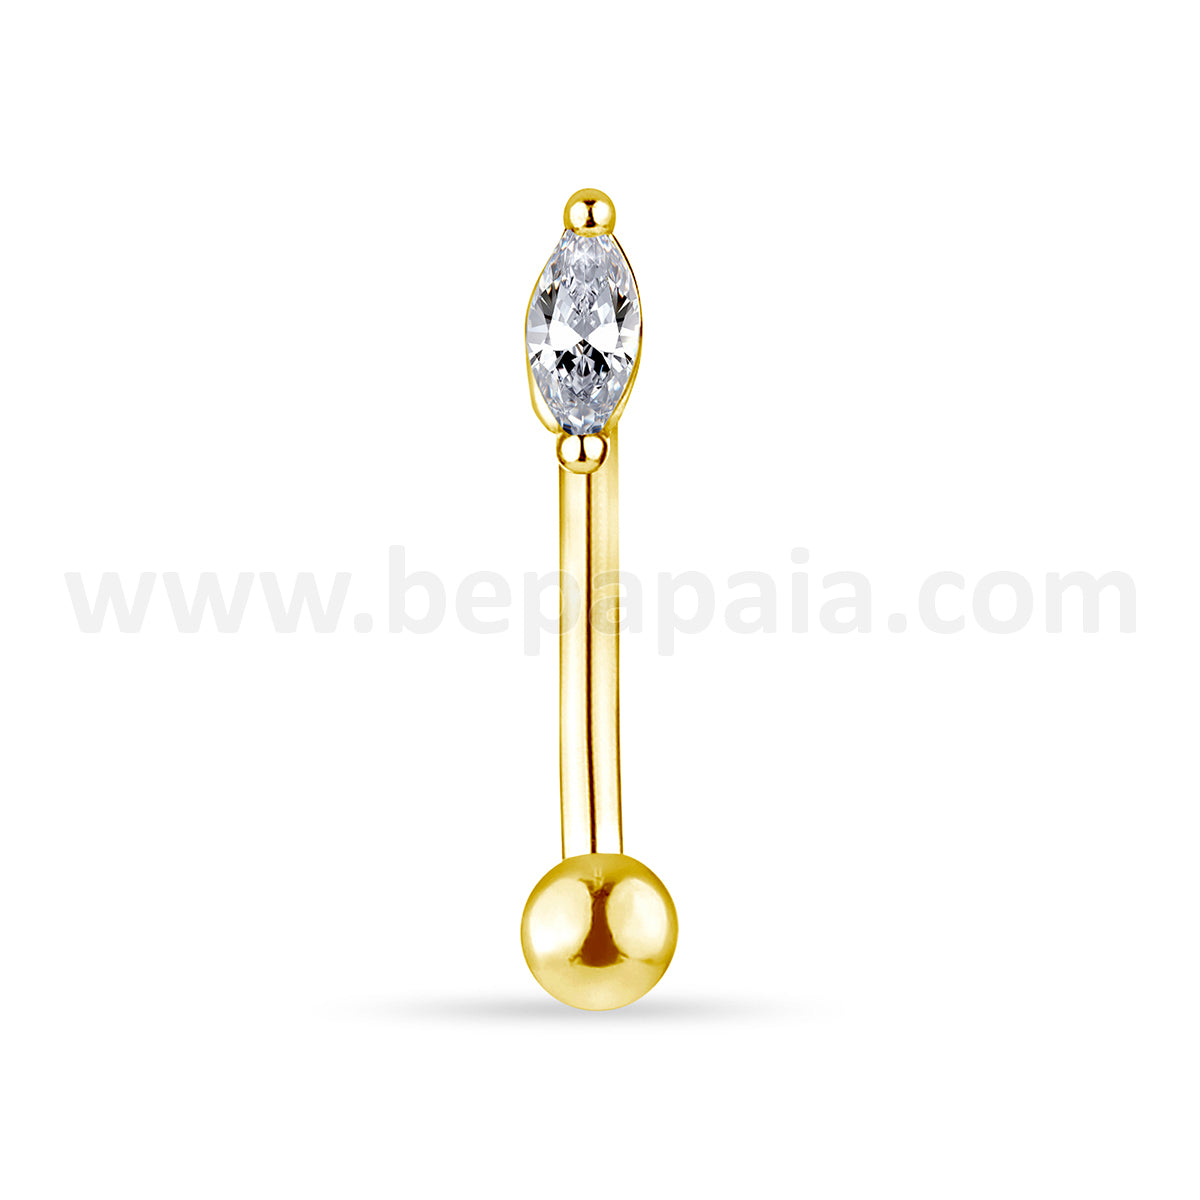 Gold-toned steel Rook Piercing Glam Gala